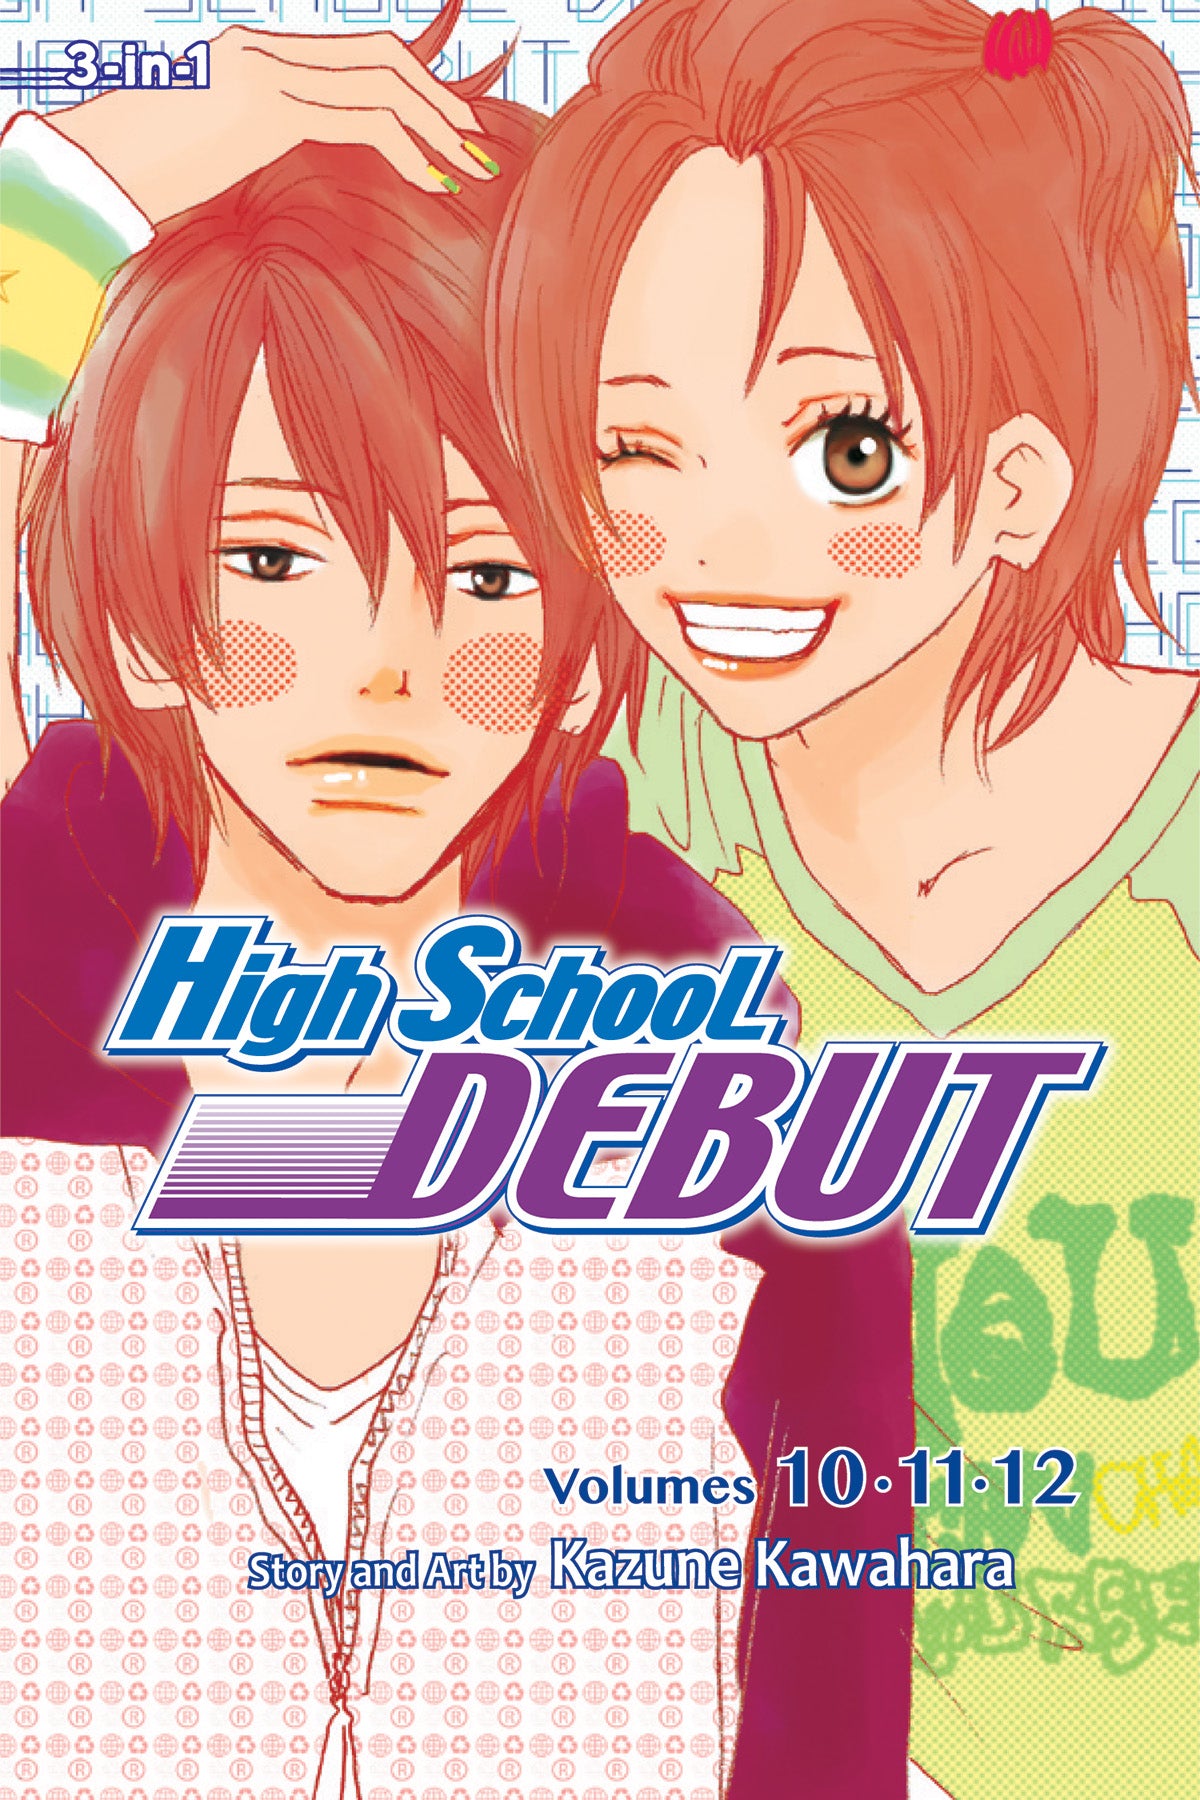 High School Debut 3 in 1 Vol 4 Soft Cover